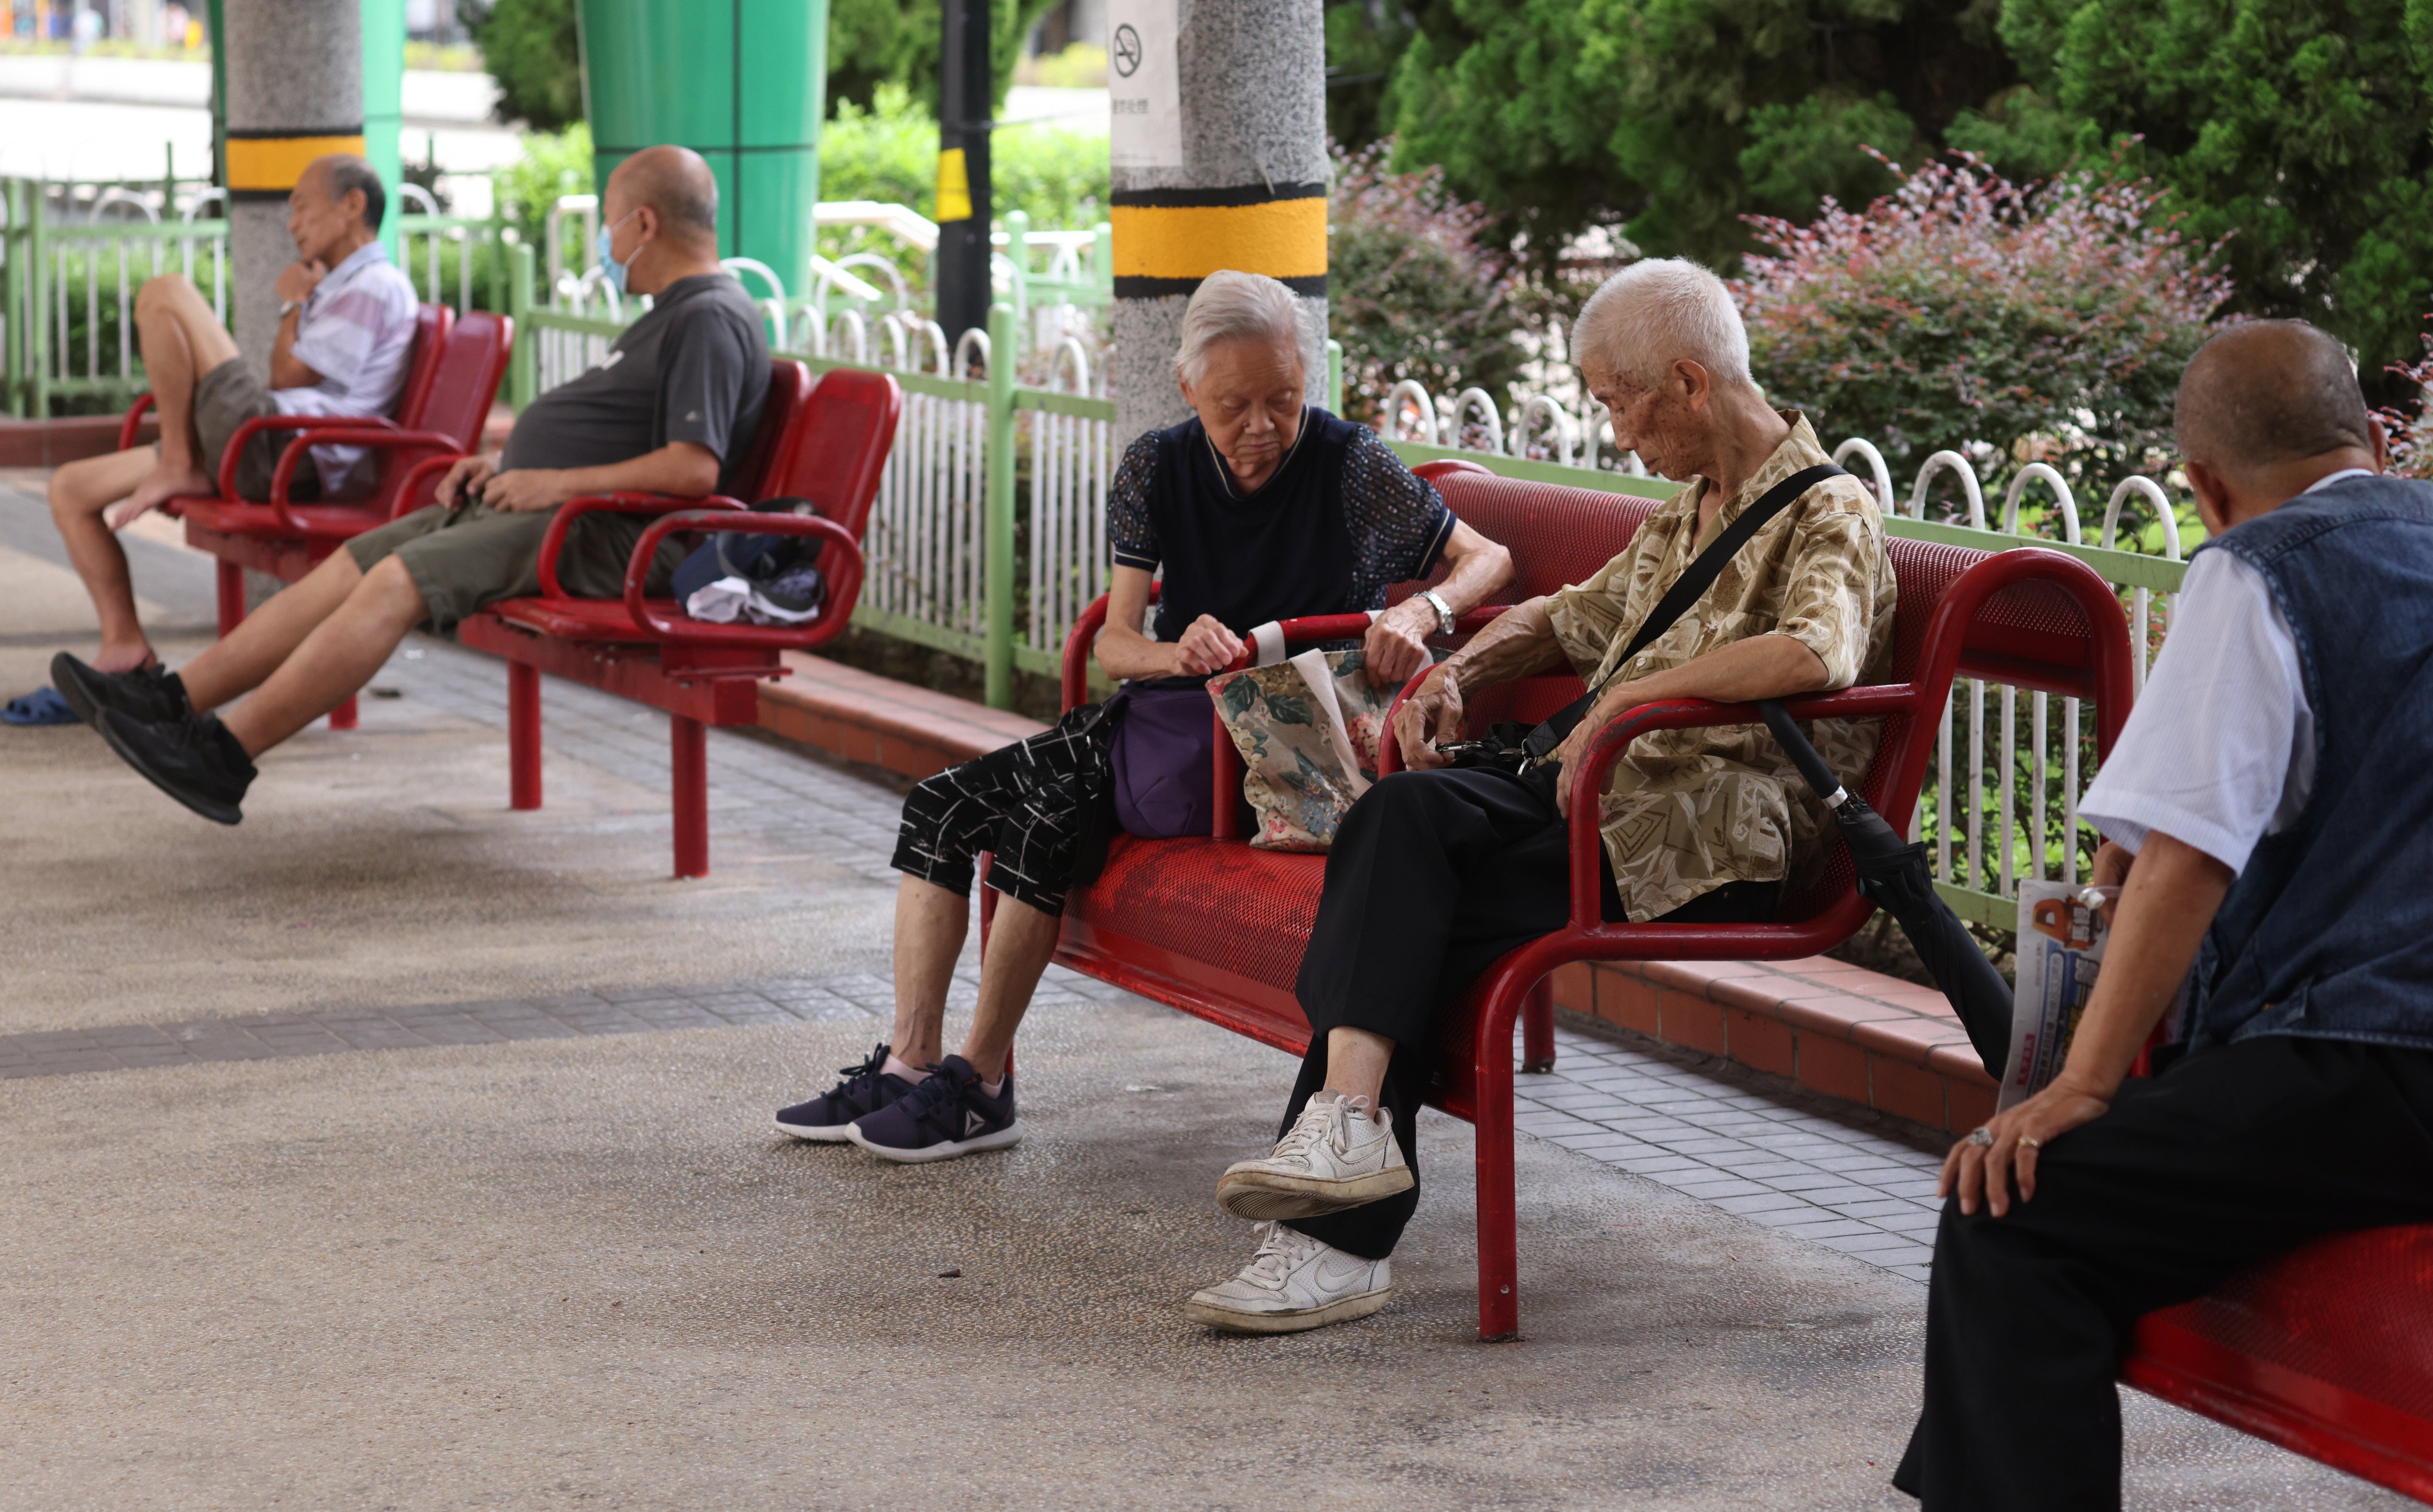 Elderly people gather at a park in Sham Shui Po on August 20. The rapid rise in the number of people aged 65 and older in Hong Kong has sparked concern about a growing lack of care home places and healthcare for the elderly. Photo: Yik Yeung-man